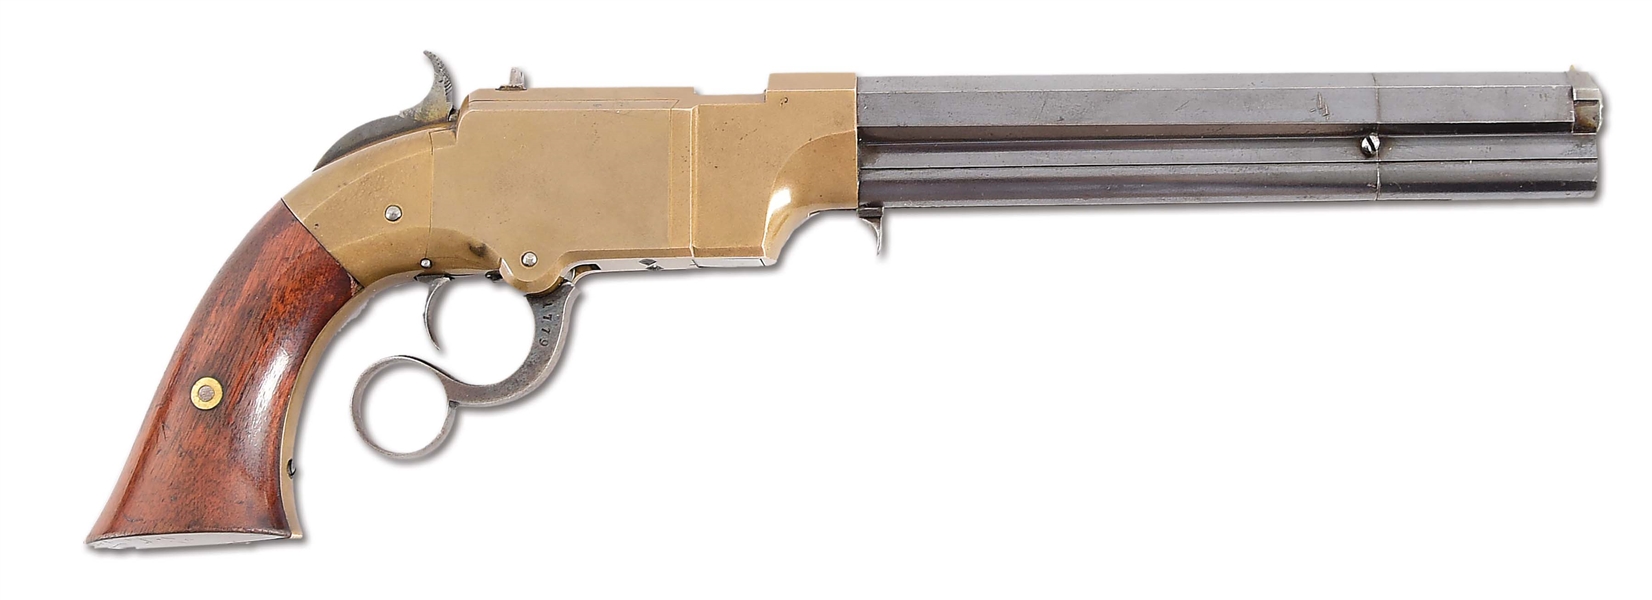 (A) HIGH CONDITION NAVY SIZE VOLCANIC LEVER ACTION PISTOL.